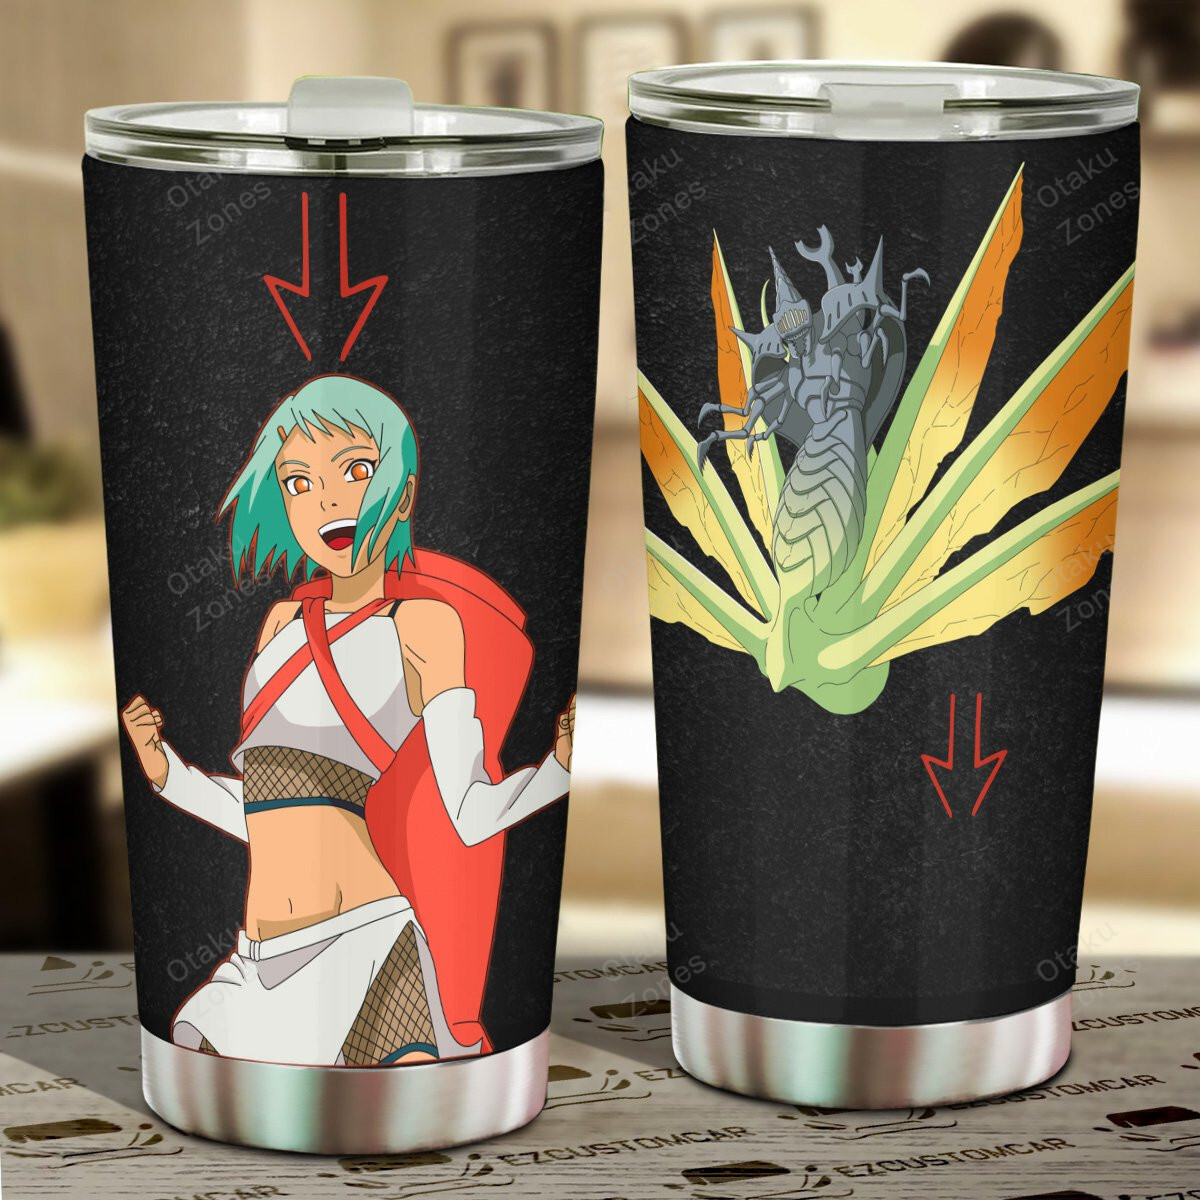 Go ahead and order your new tumbler now! 18